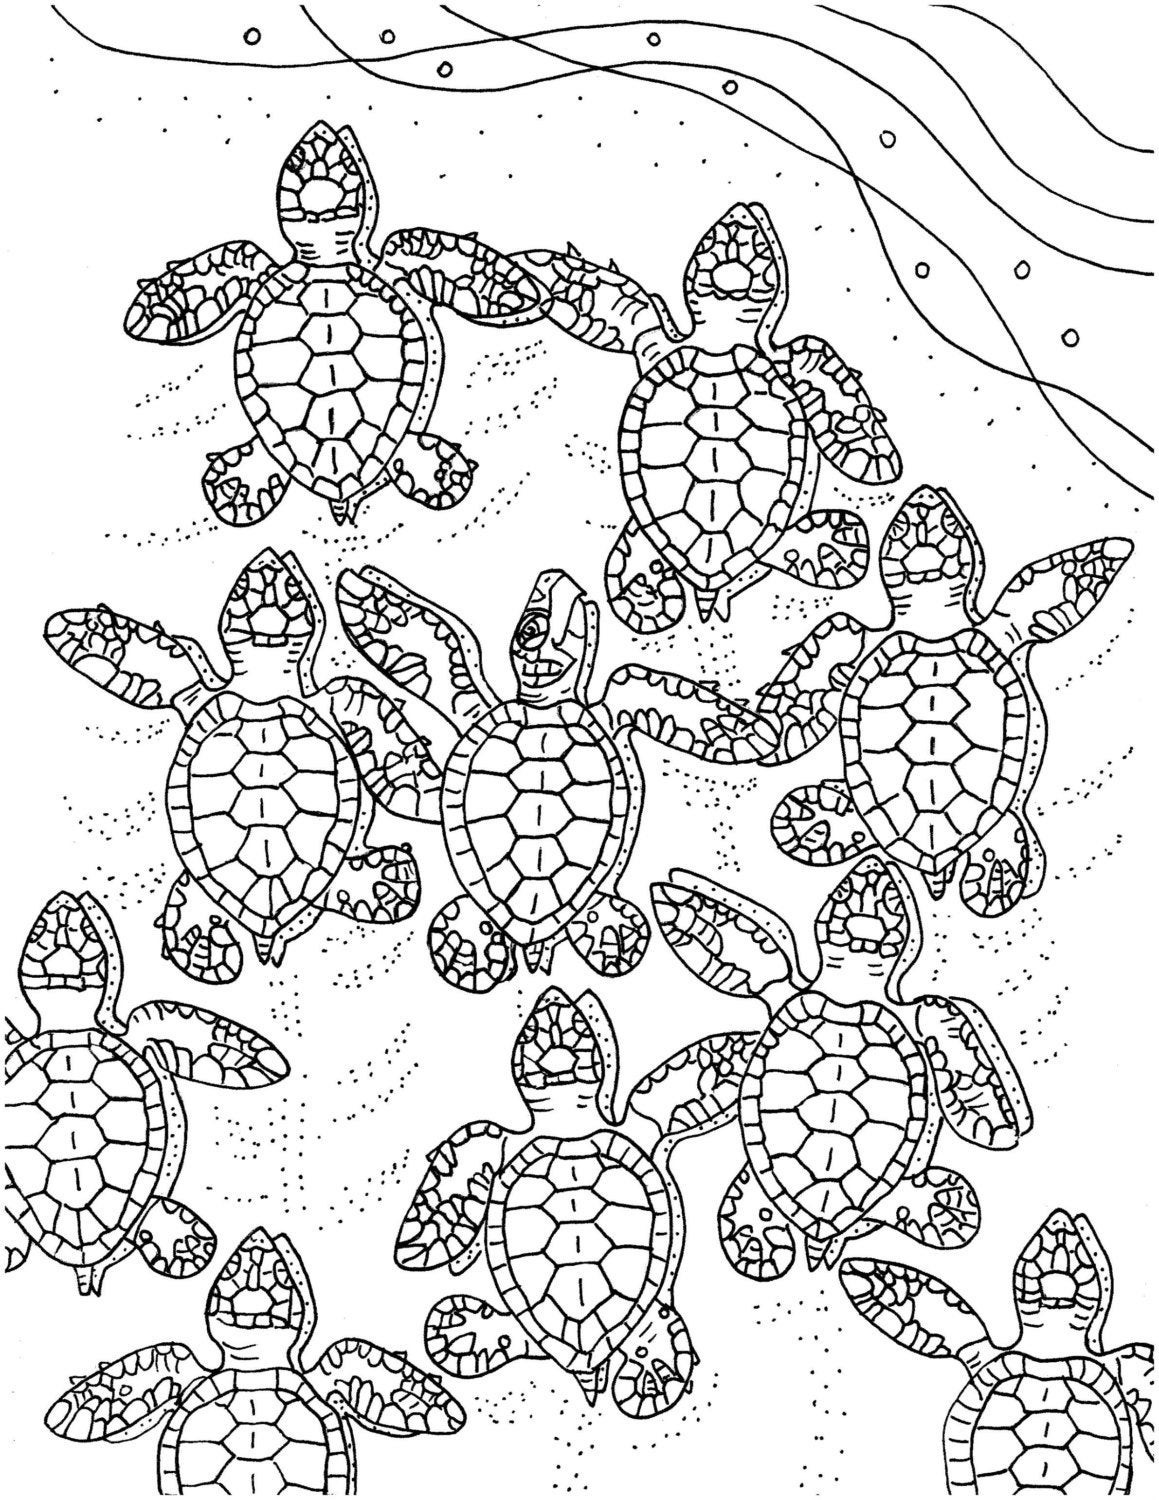 Sea Turtle Coloring Pages Printable
 Baby Sea Turtles coloring page embroidery pattern sea